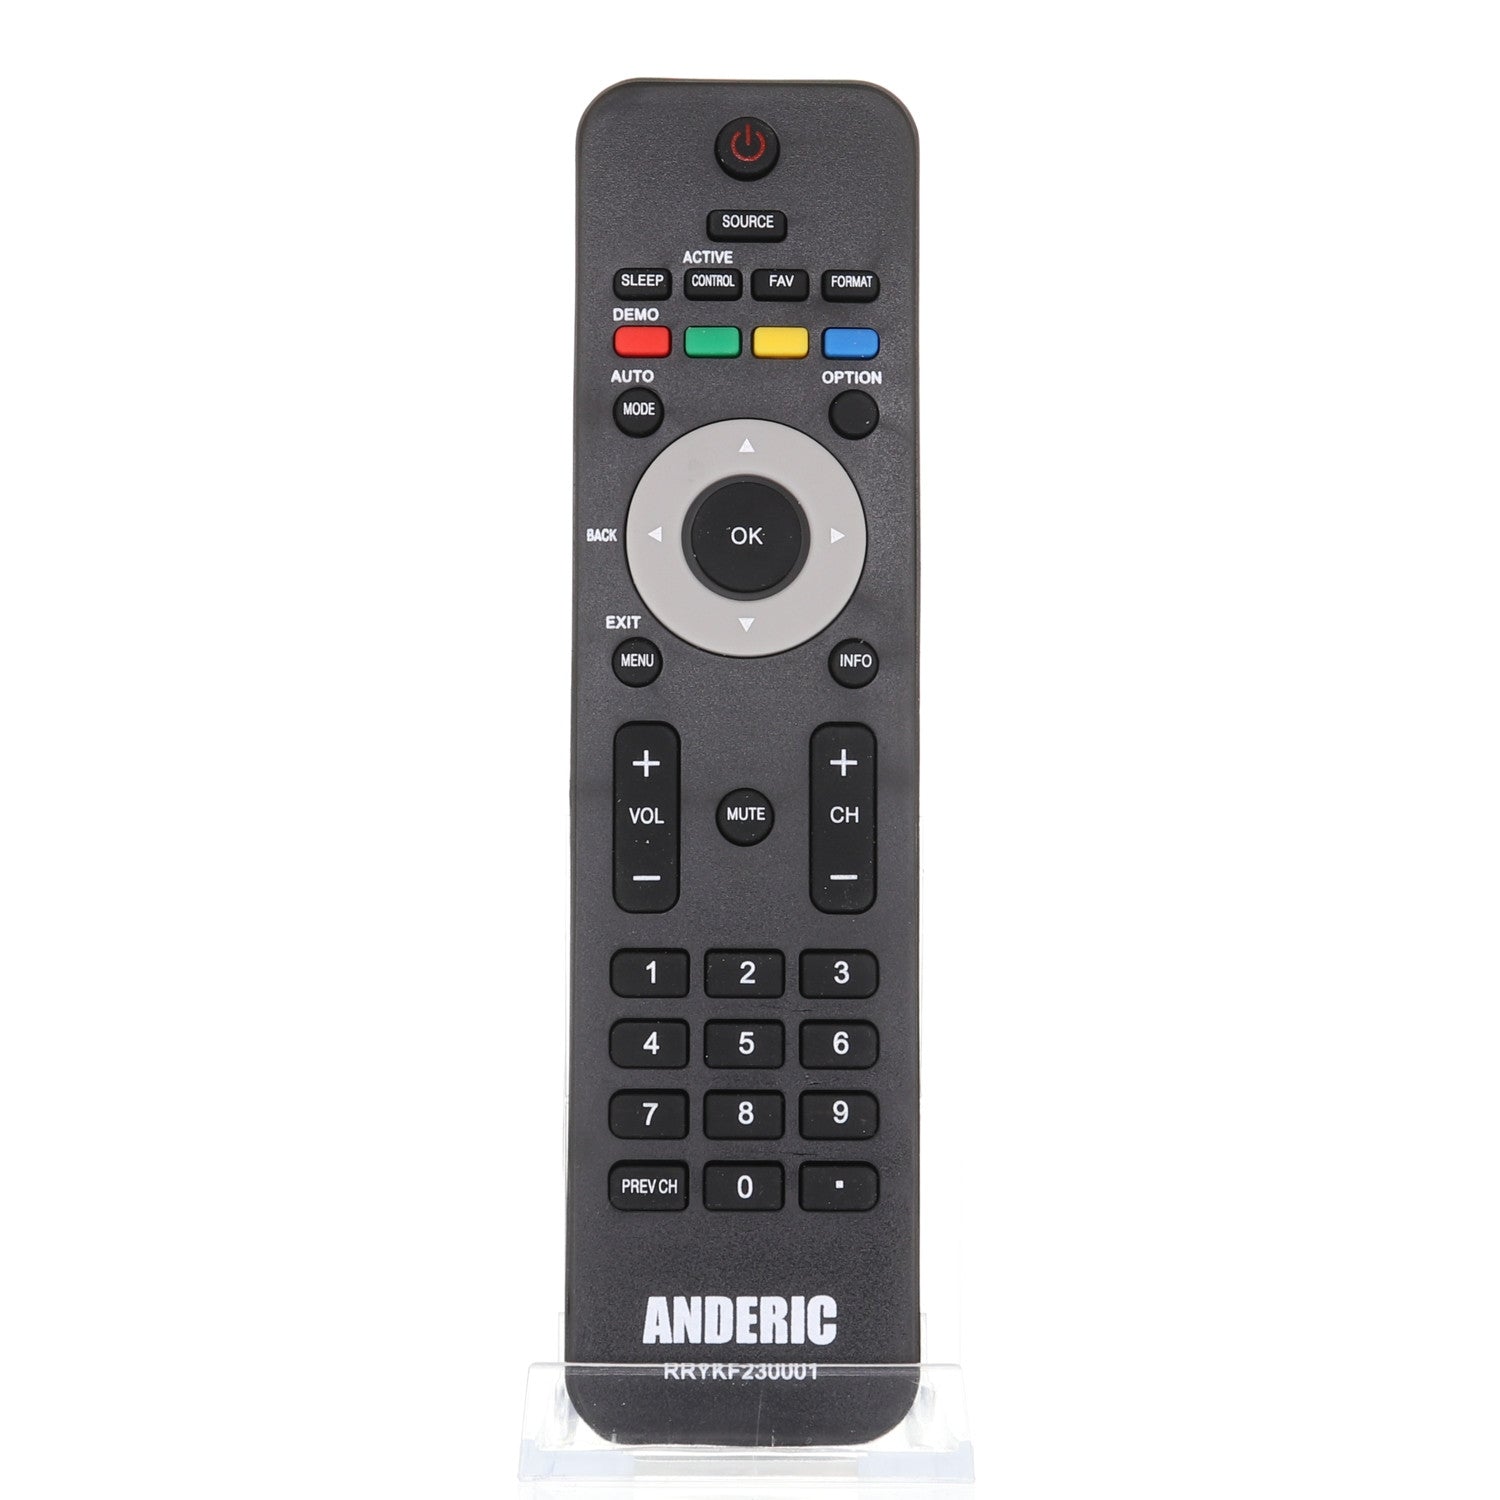 RRYKF230001 Remote Control for Philips® TVs